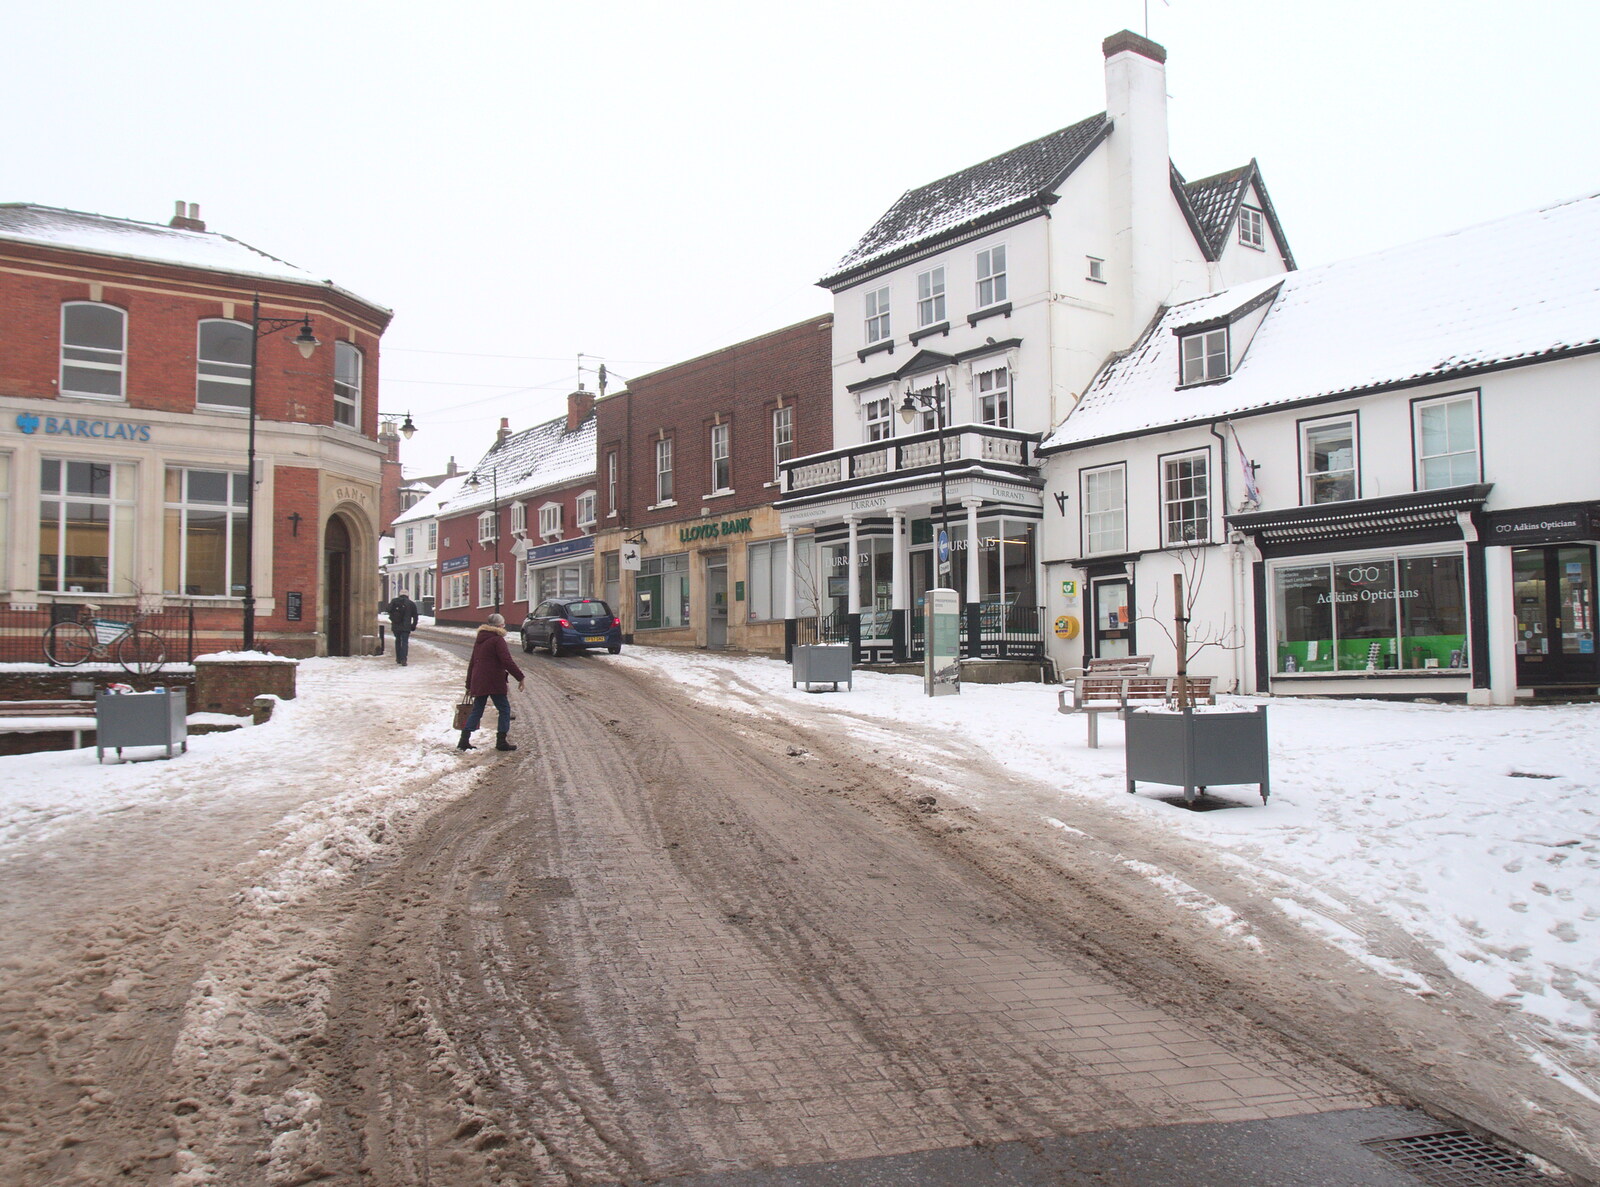 Market Hill is still quite snowy from More March Snow and a Postcard from Diss, Norfolk - 3rd March 2018